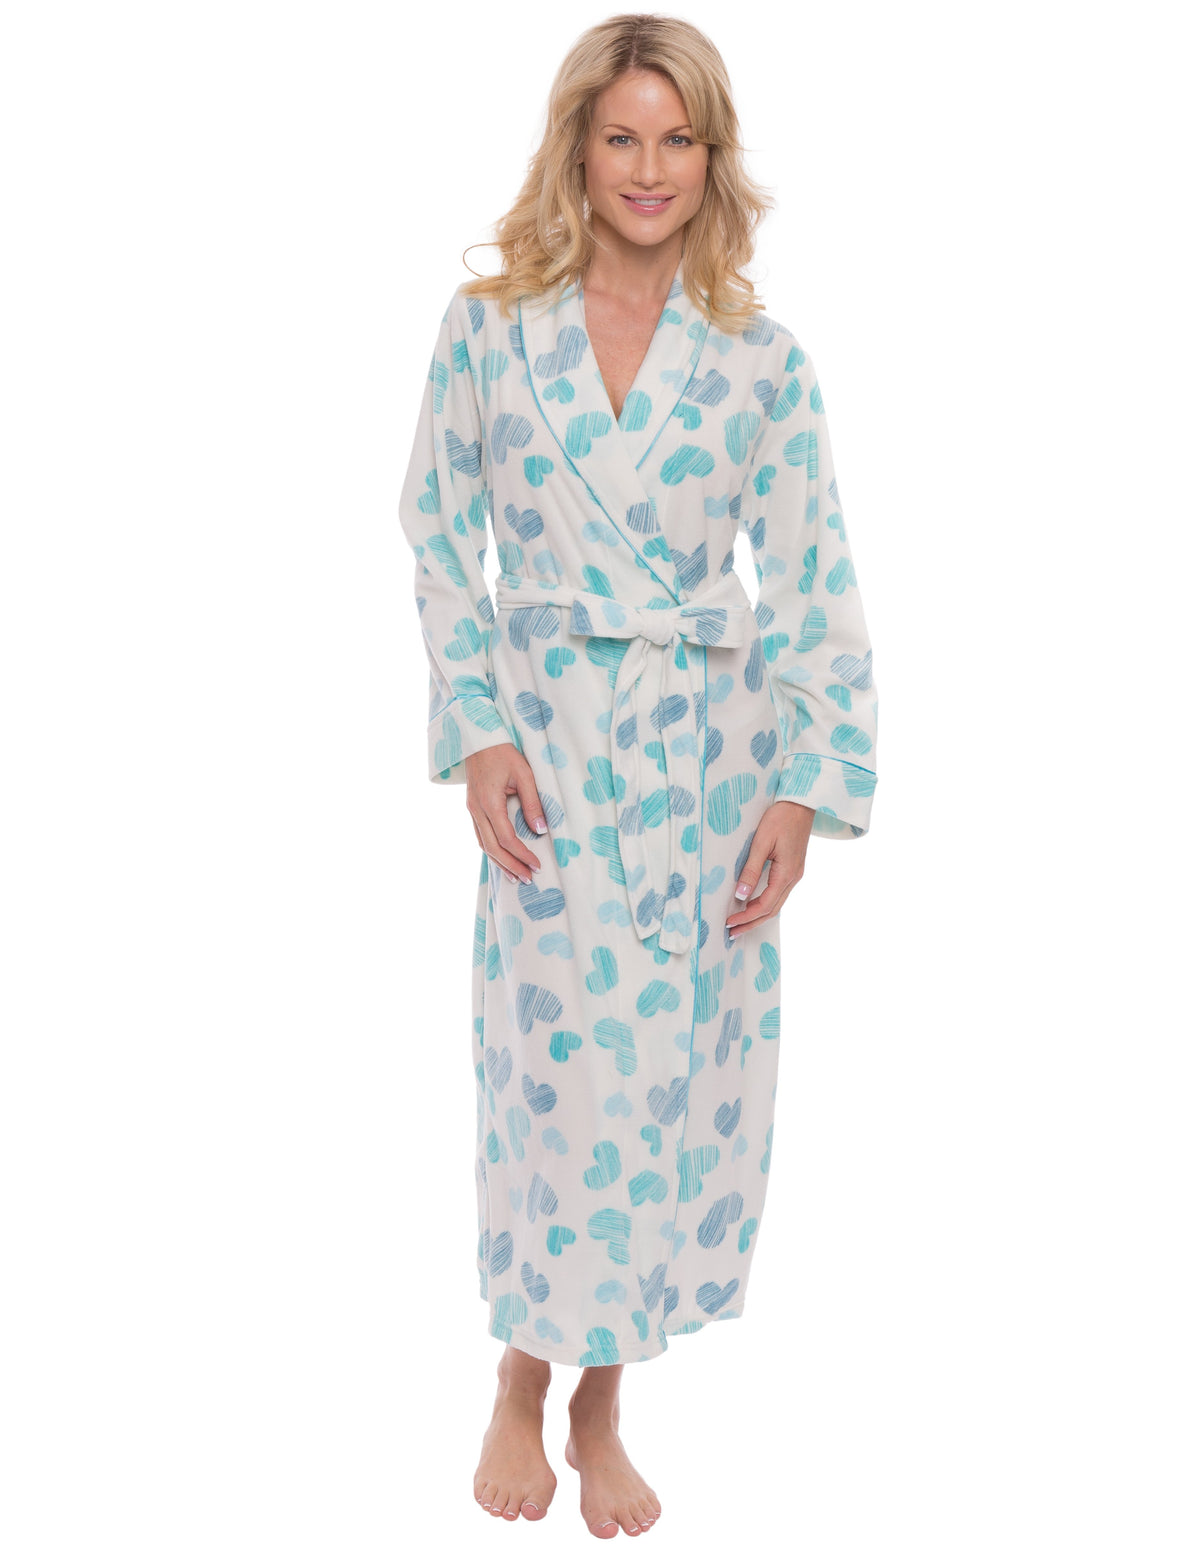 Womens Microfleece Robe - Scribbled Hearts White/Blue